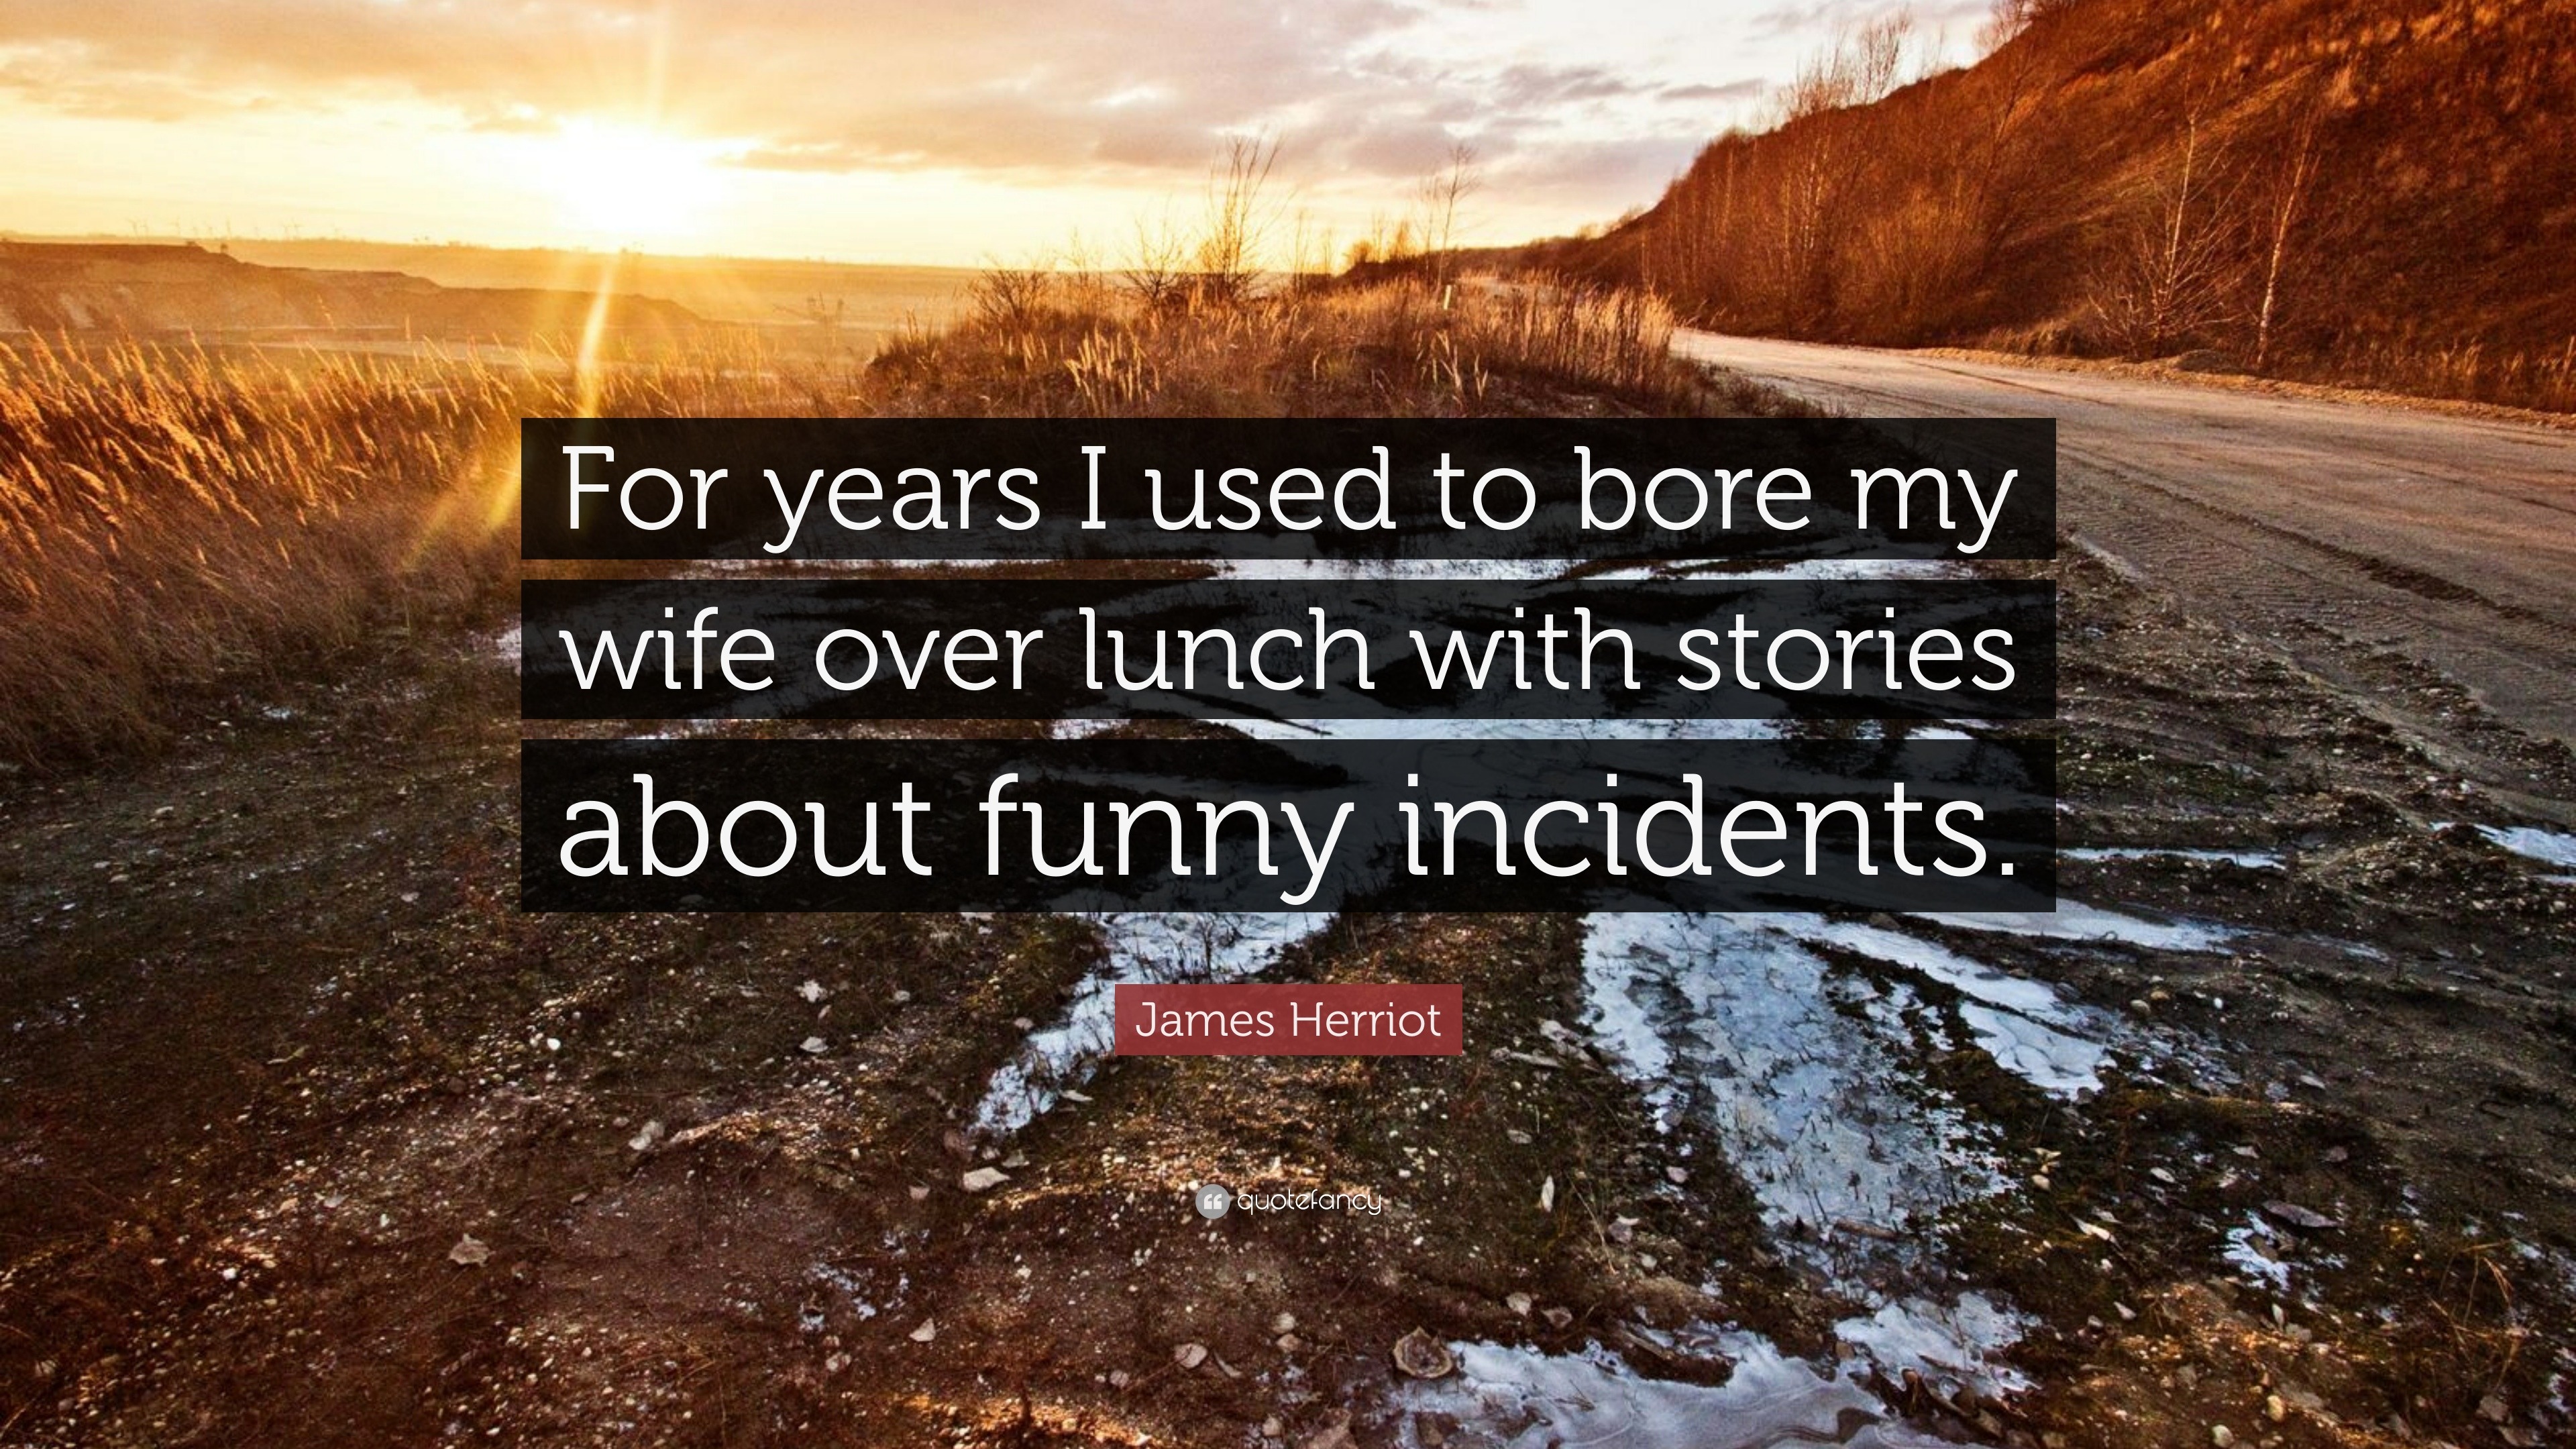 brett lowrey recommends do my wife stories pic